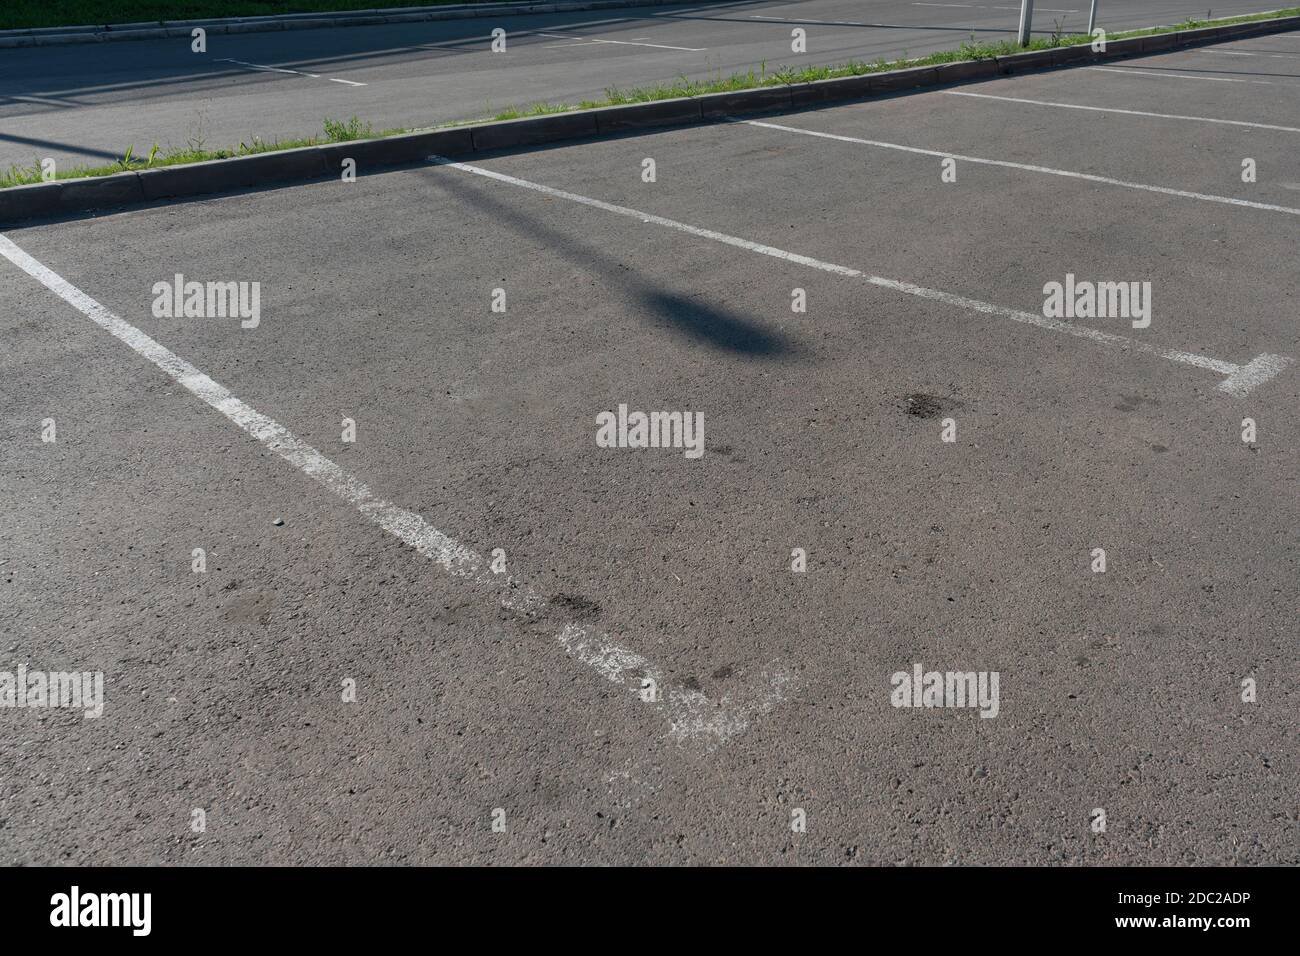 White markings of parking spaces on asphalt. Stock Photo